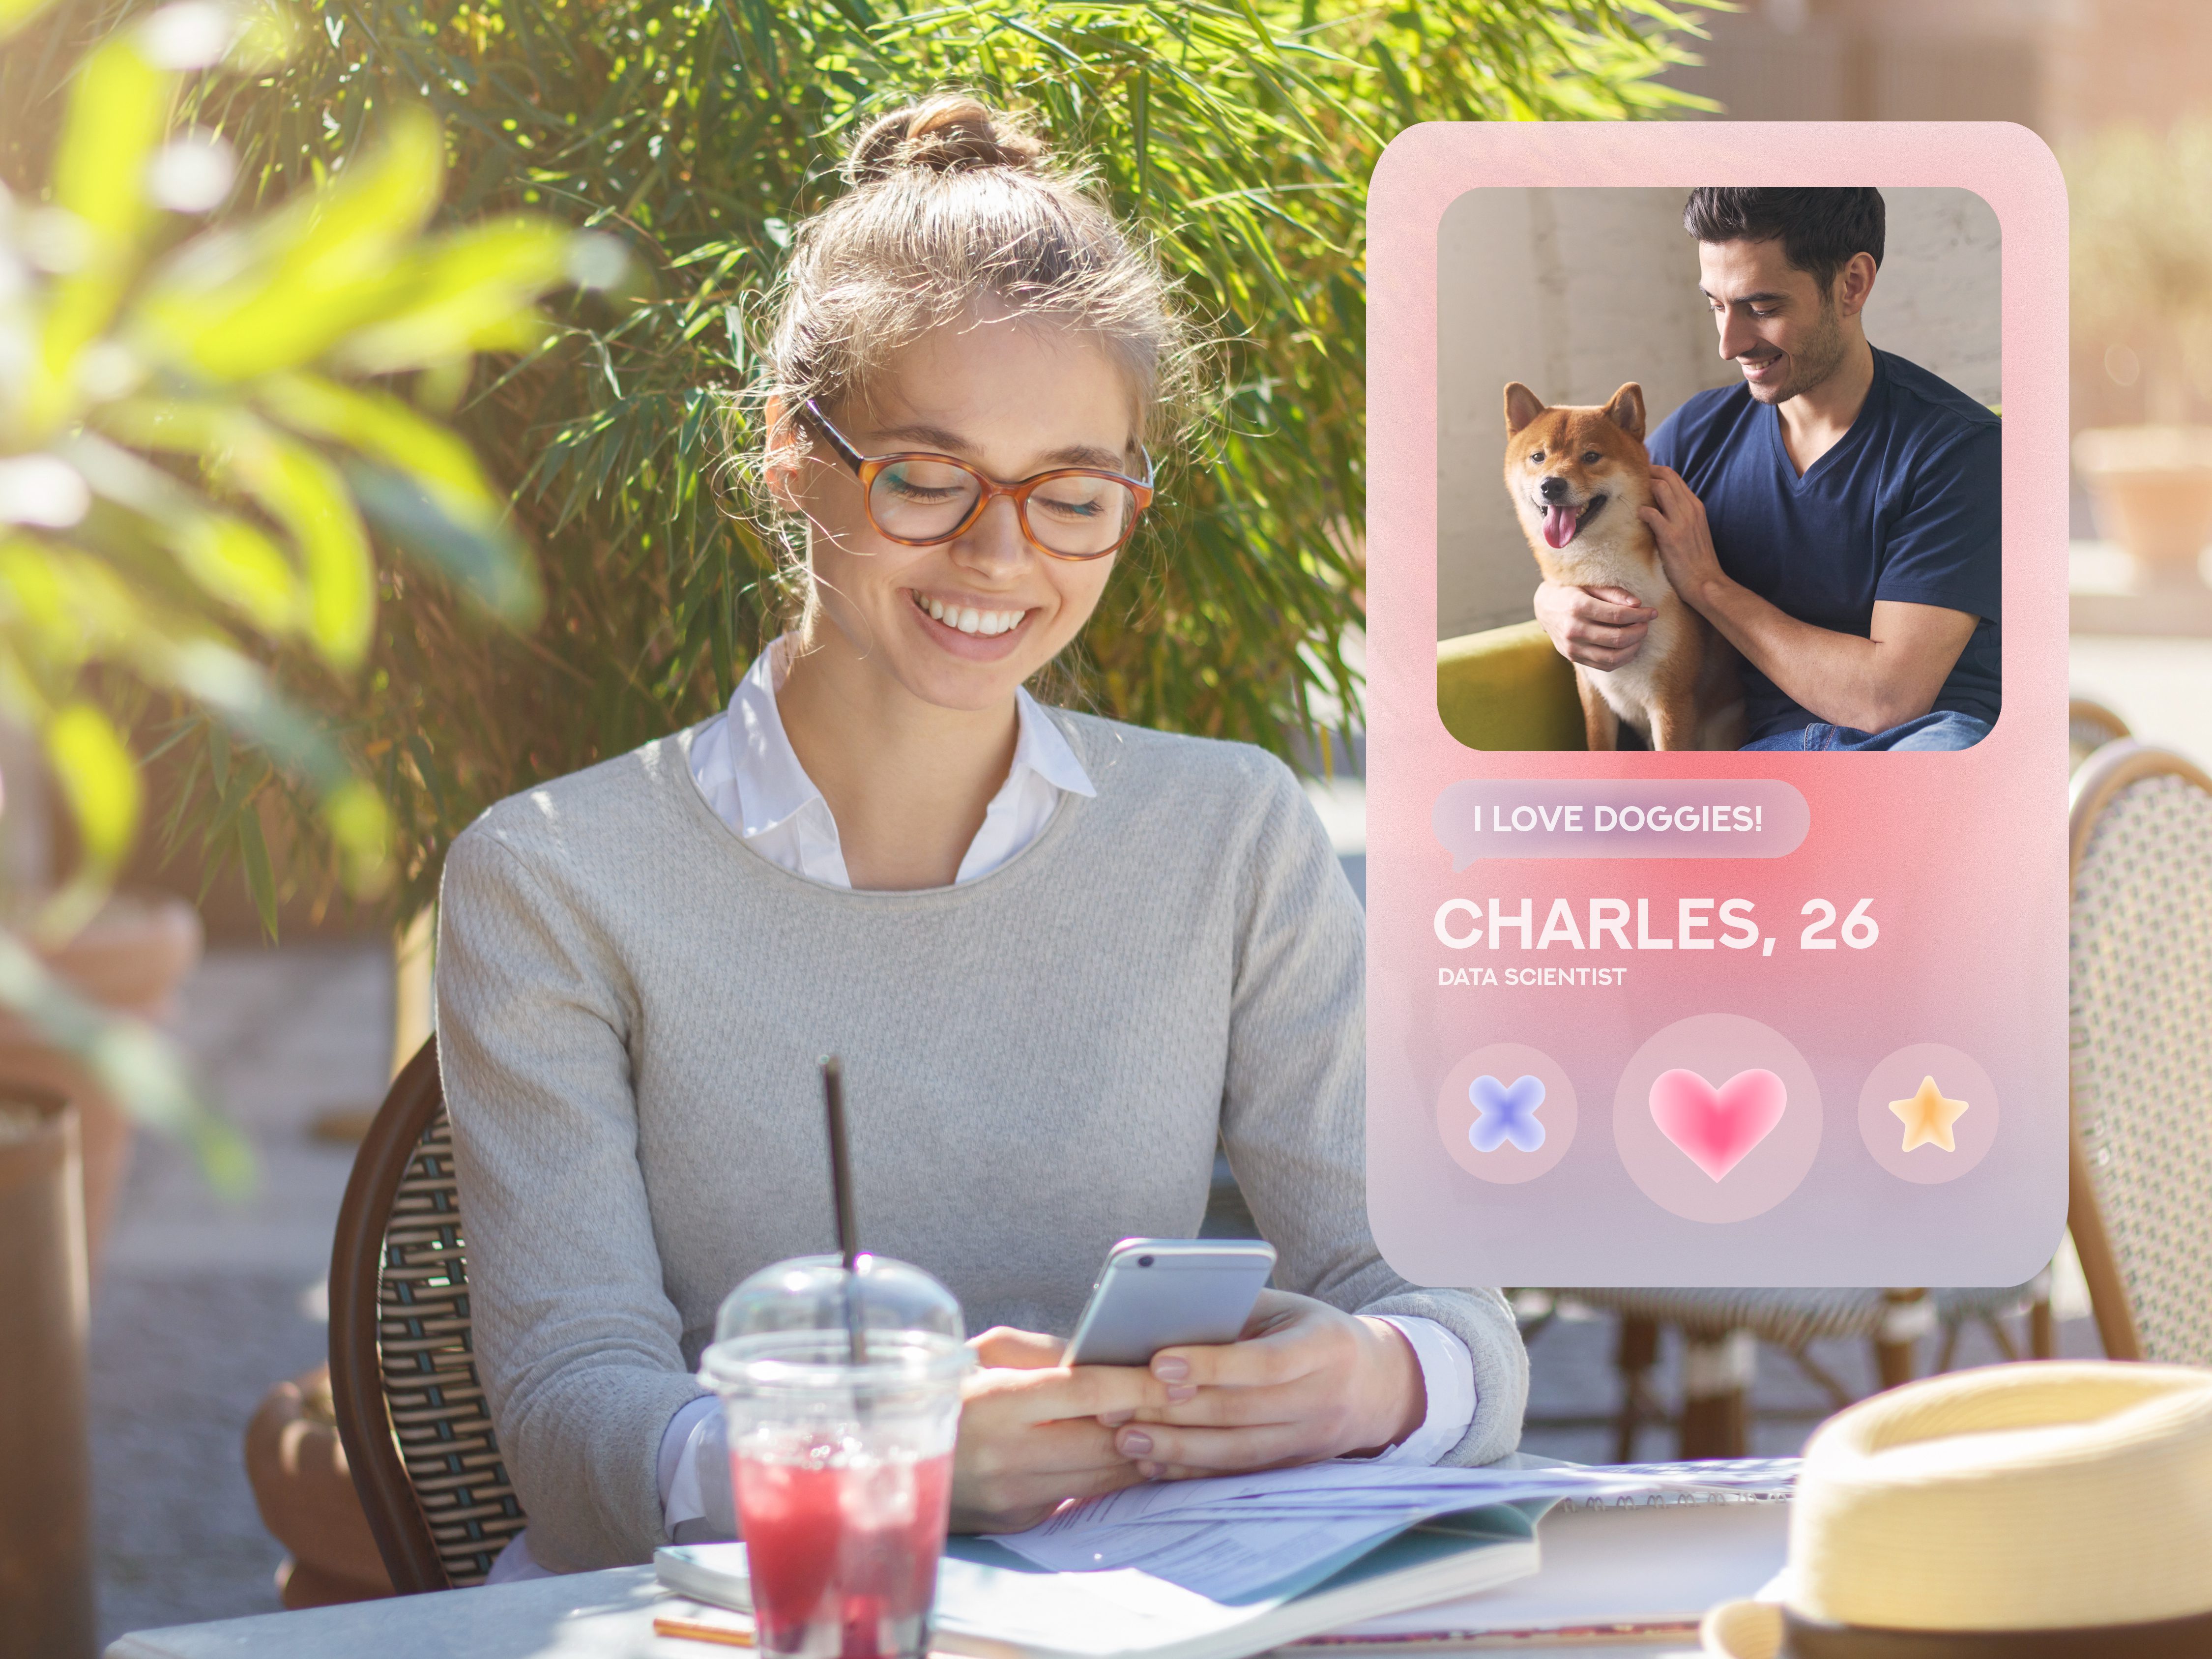 What Would Be An Ideal Dating Profile That Women Would Be Interested In Matching With?